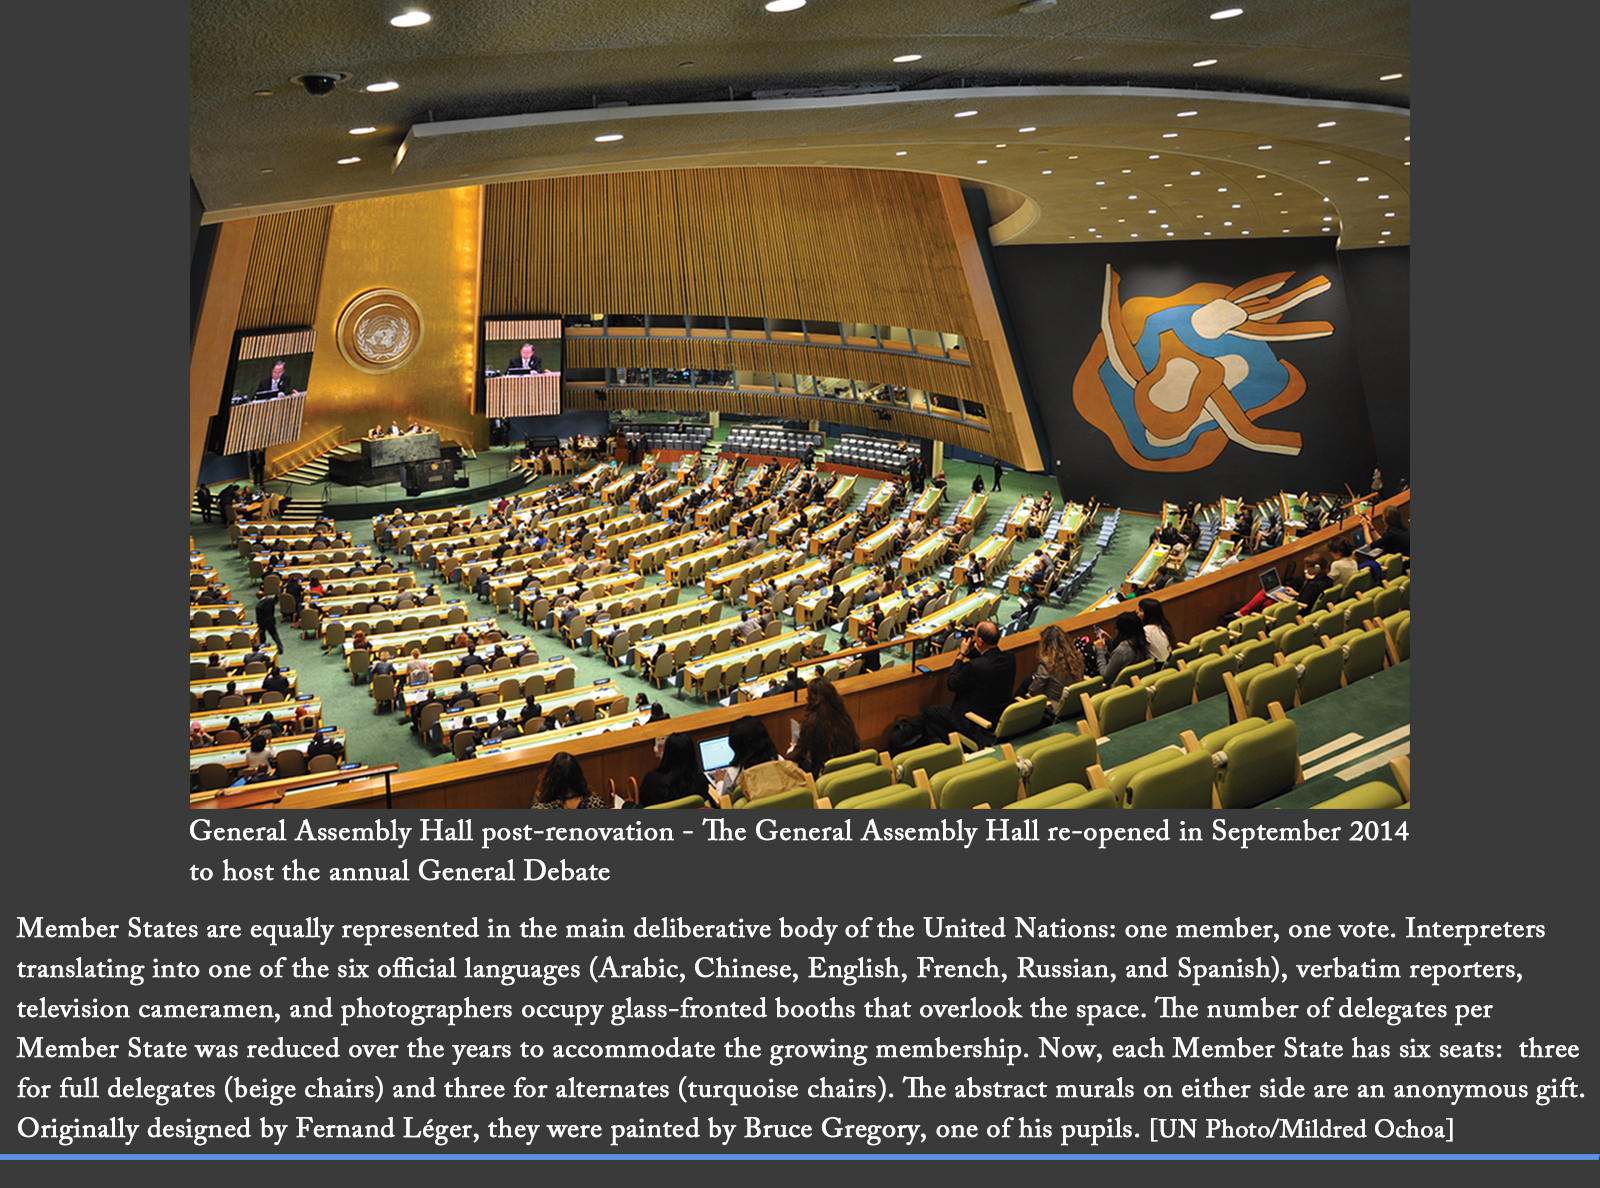 The renovated General Assembly Hall re-opened in September 2014 in time to host the annual General Debate 